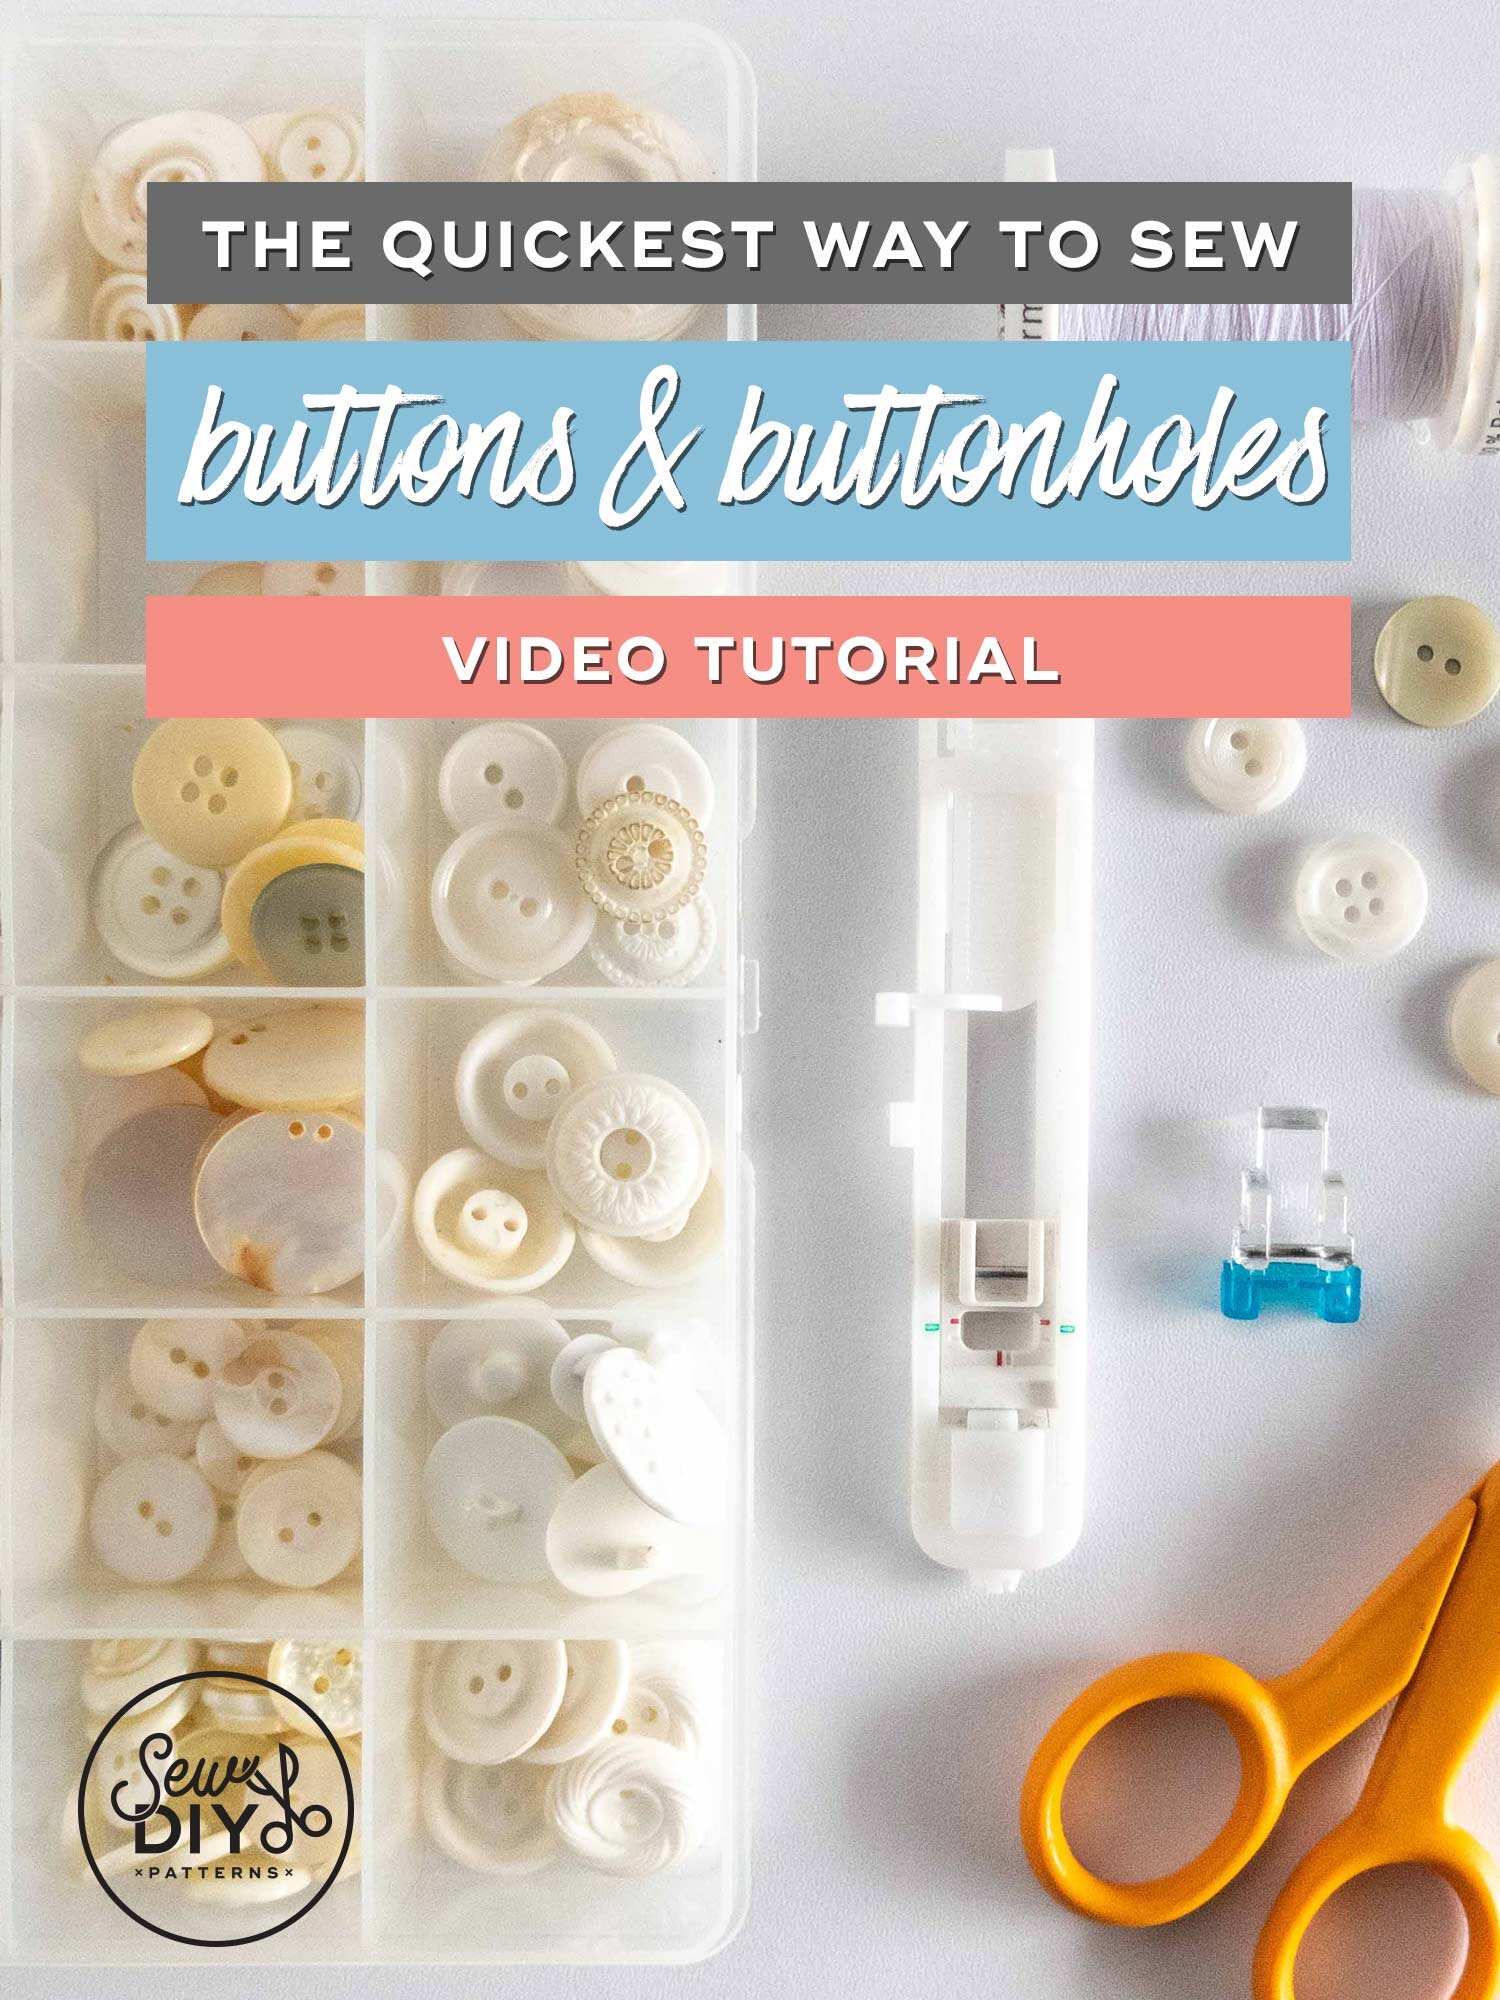 How to Sew a Buttonhole by Hand: A Free Photo Tutorial